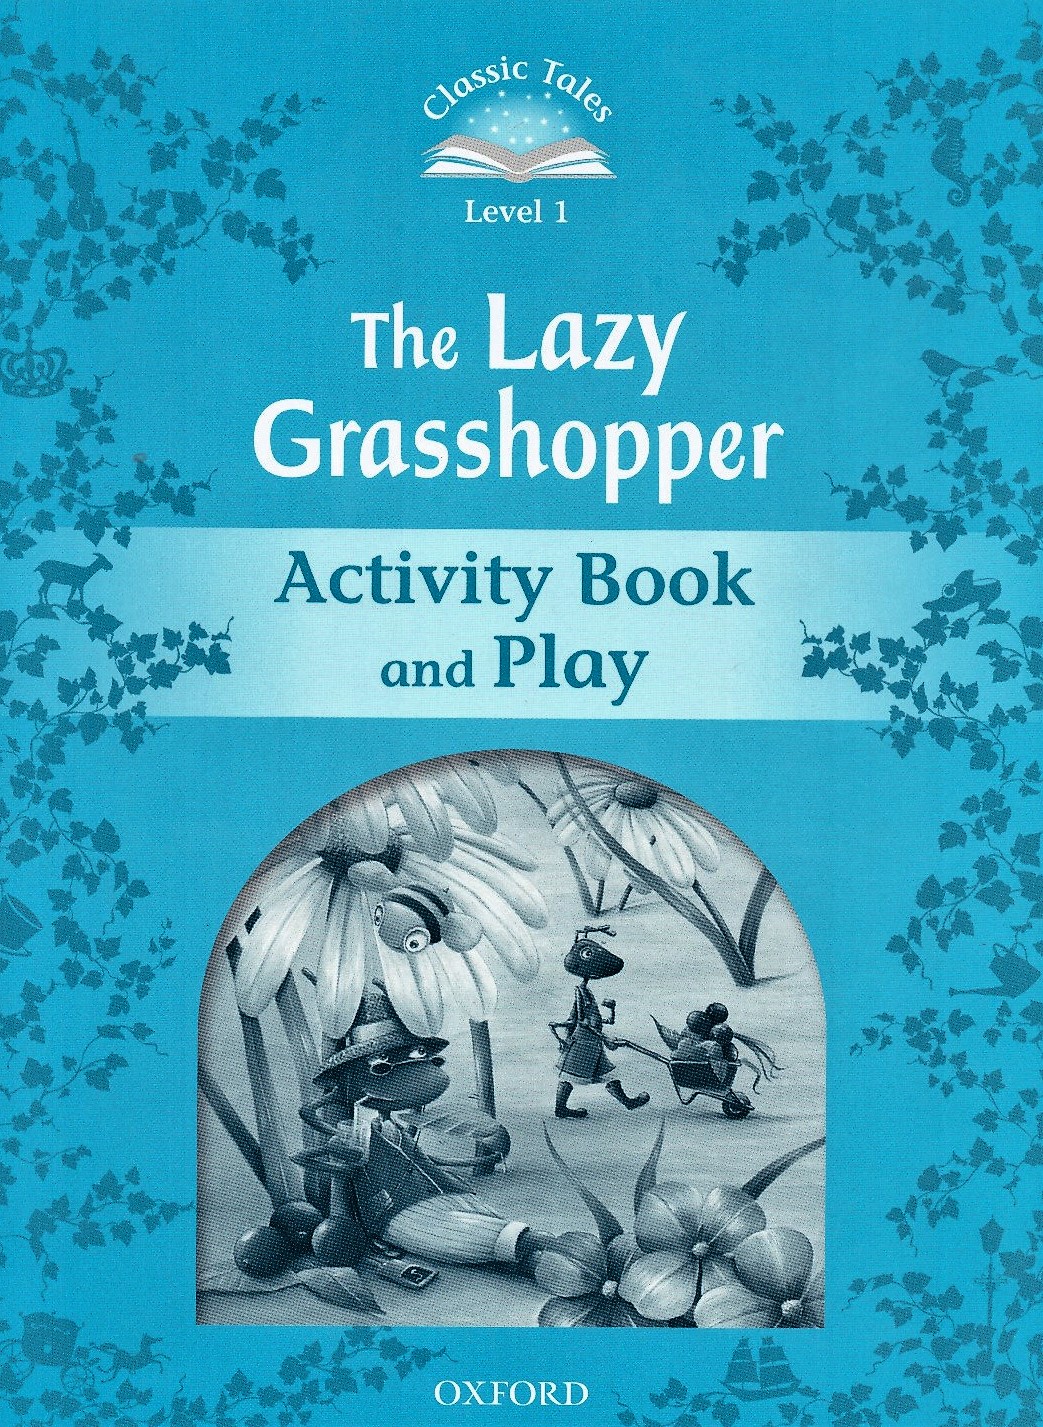 The Lazy Grasshopper Activity Book and Play